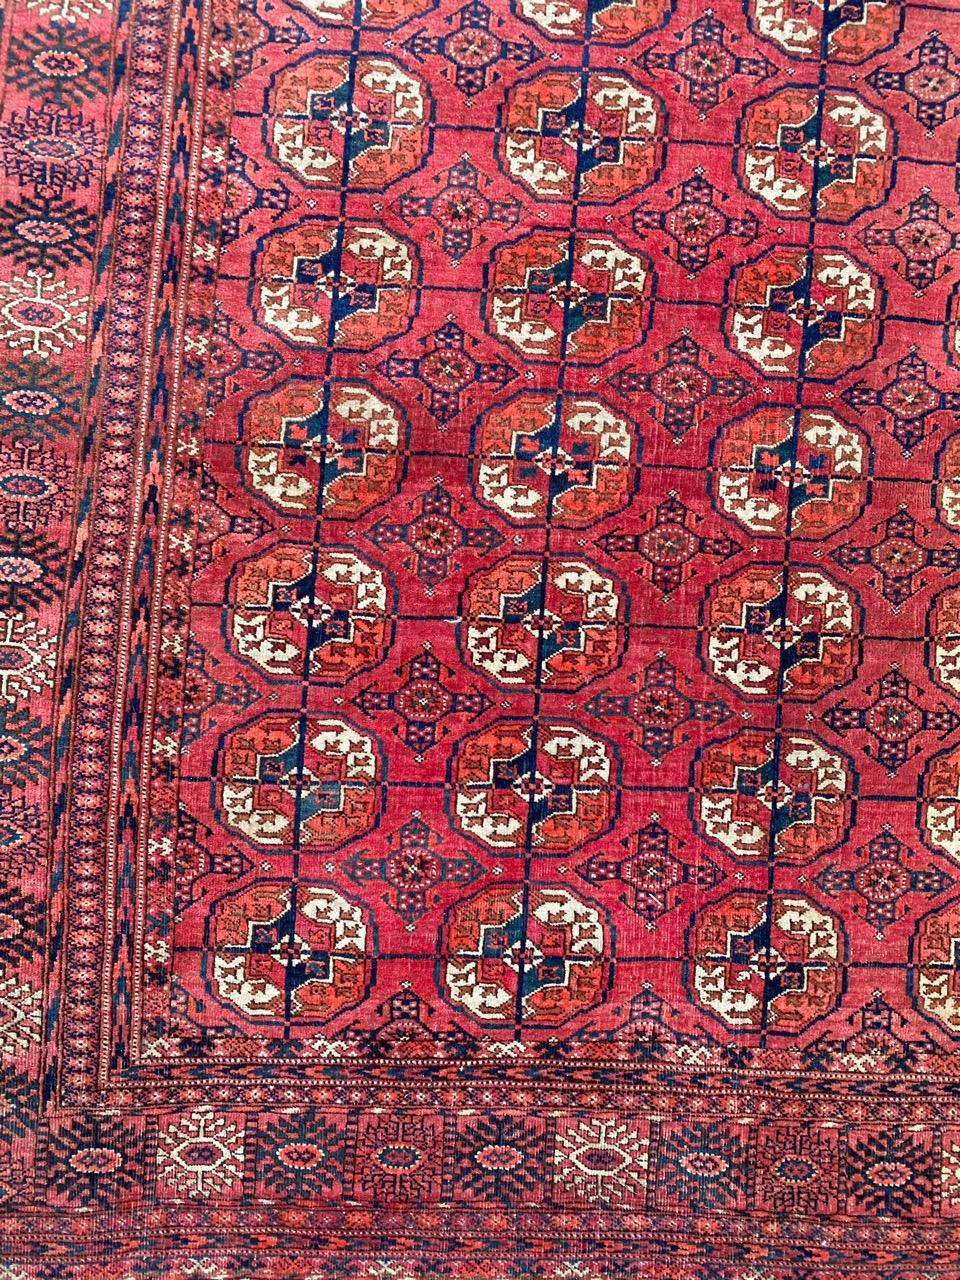 Nice vintage Turkmen rug with beautiful Bokhara design and nice colors, entirely hand knotted with wool velvet on wool foundation.

✨✨✨
